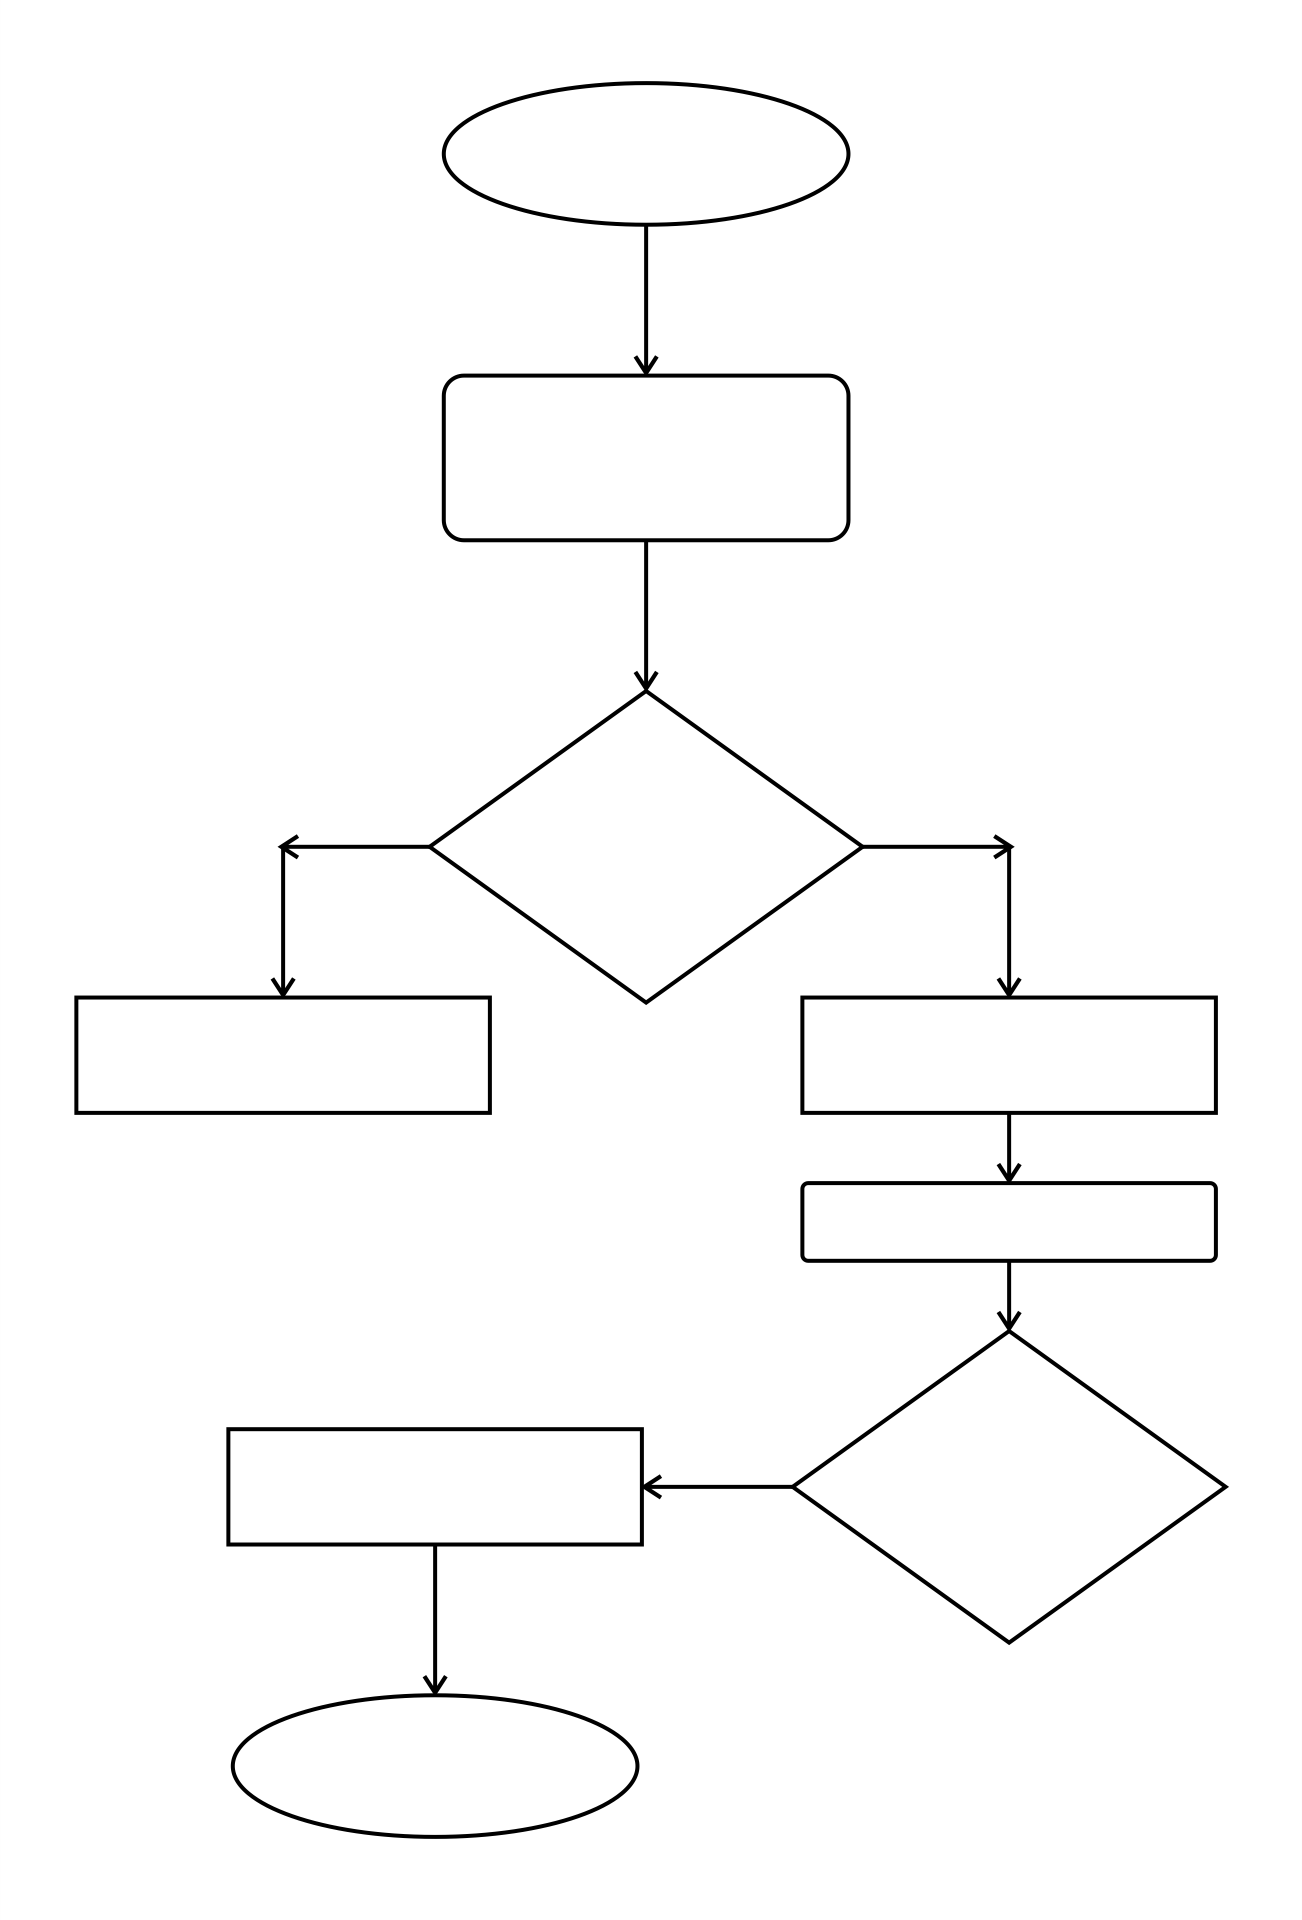 Free Blank Flow Chart Template For Word